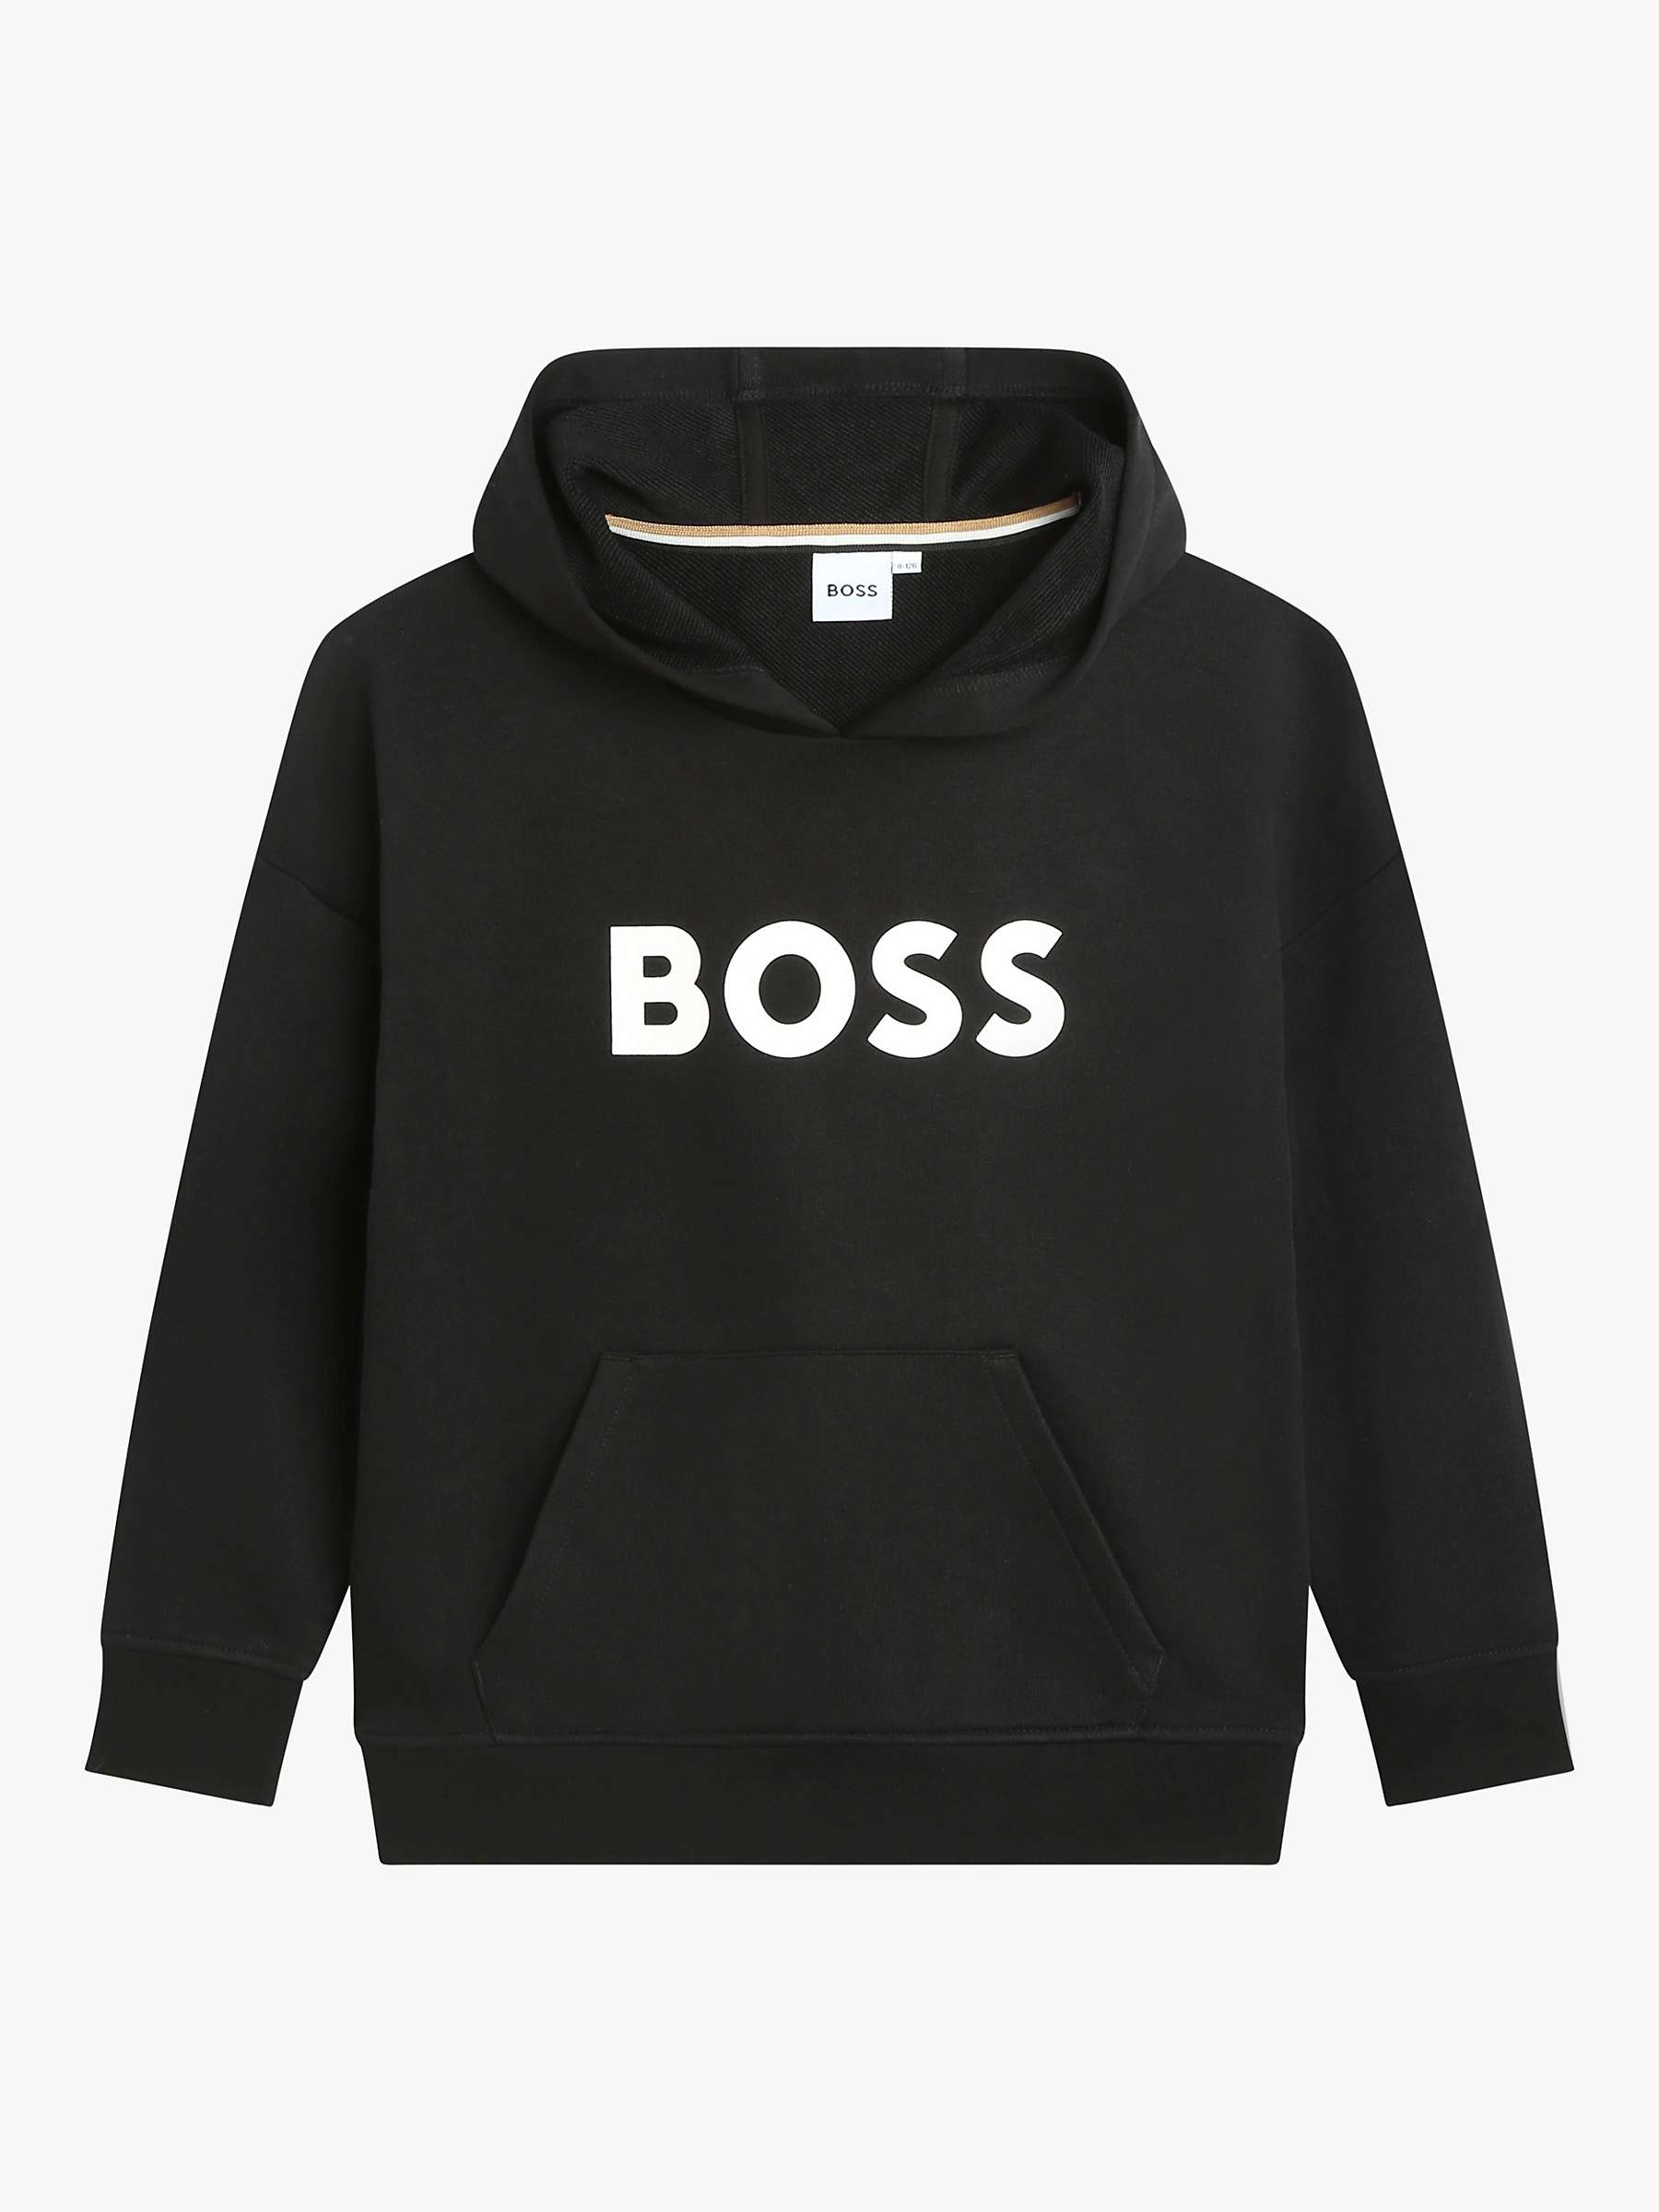 Buy BOSS Kids' Cotton Logo Embroidered Hoodie Online at johnlewis.com